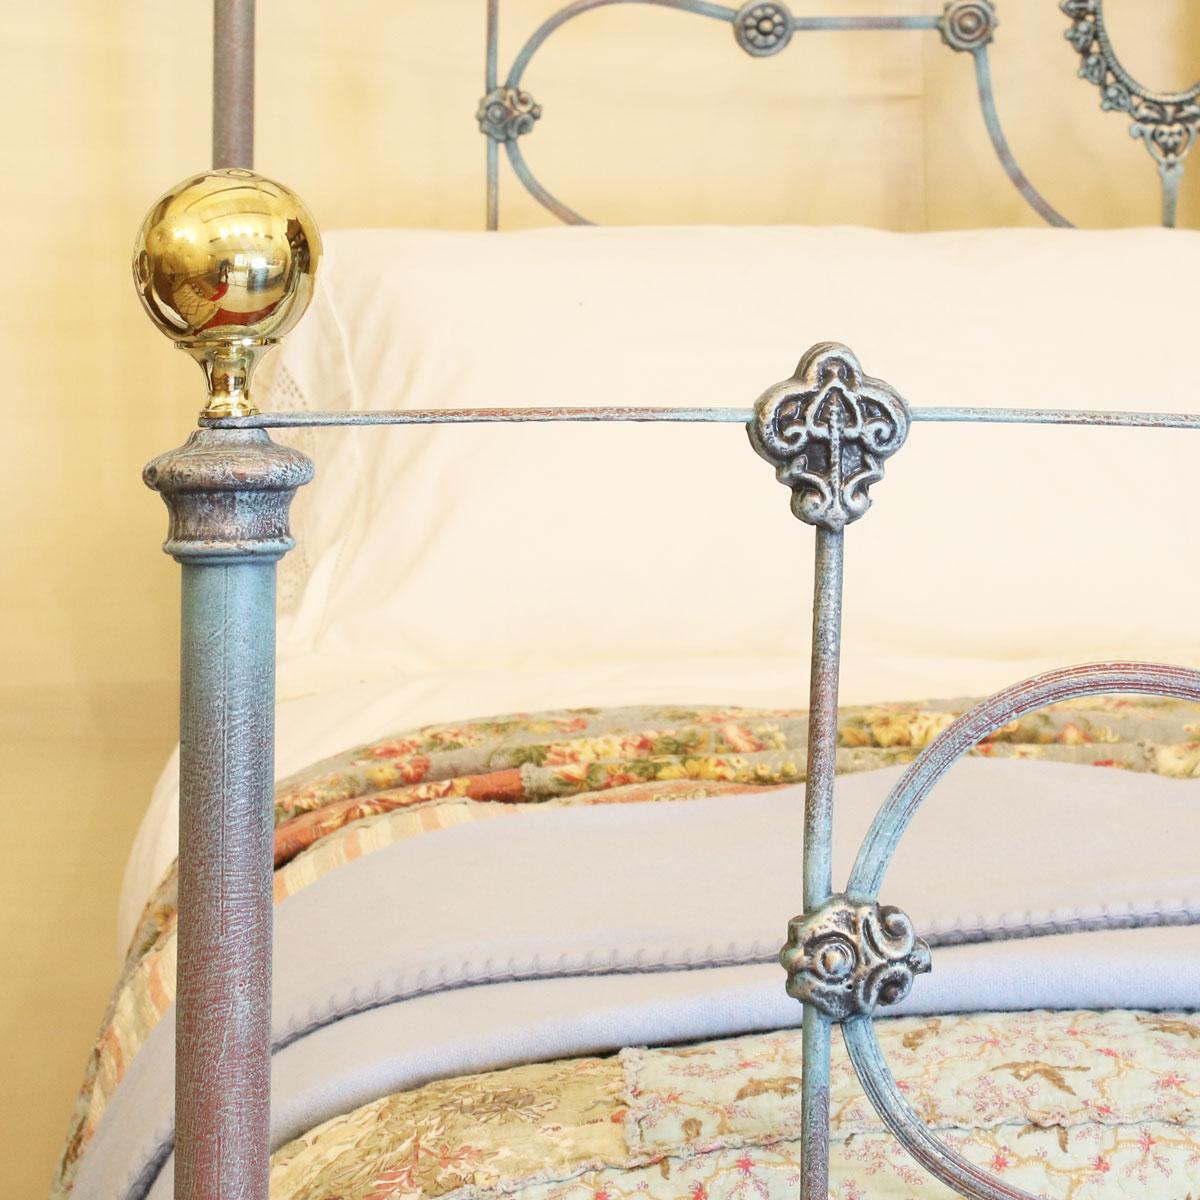 5ft wide attractive cast iron half tester bed finished in blue Verdigris.

The price includes a standard firm bed base to support the mattress. 

The mattress, bedding and bed linen are extra.